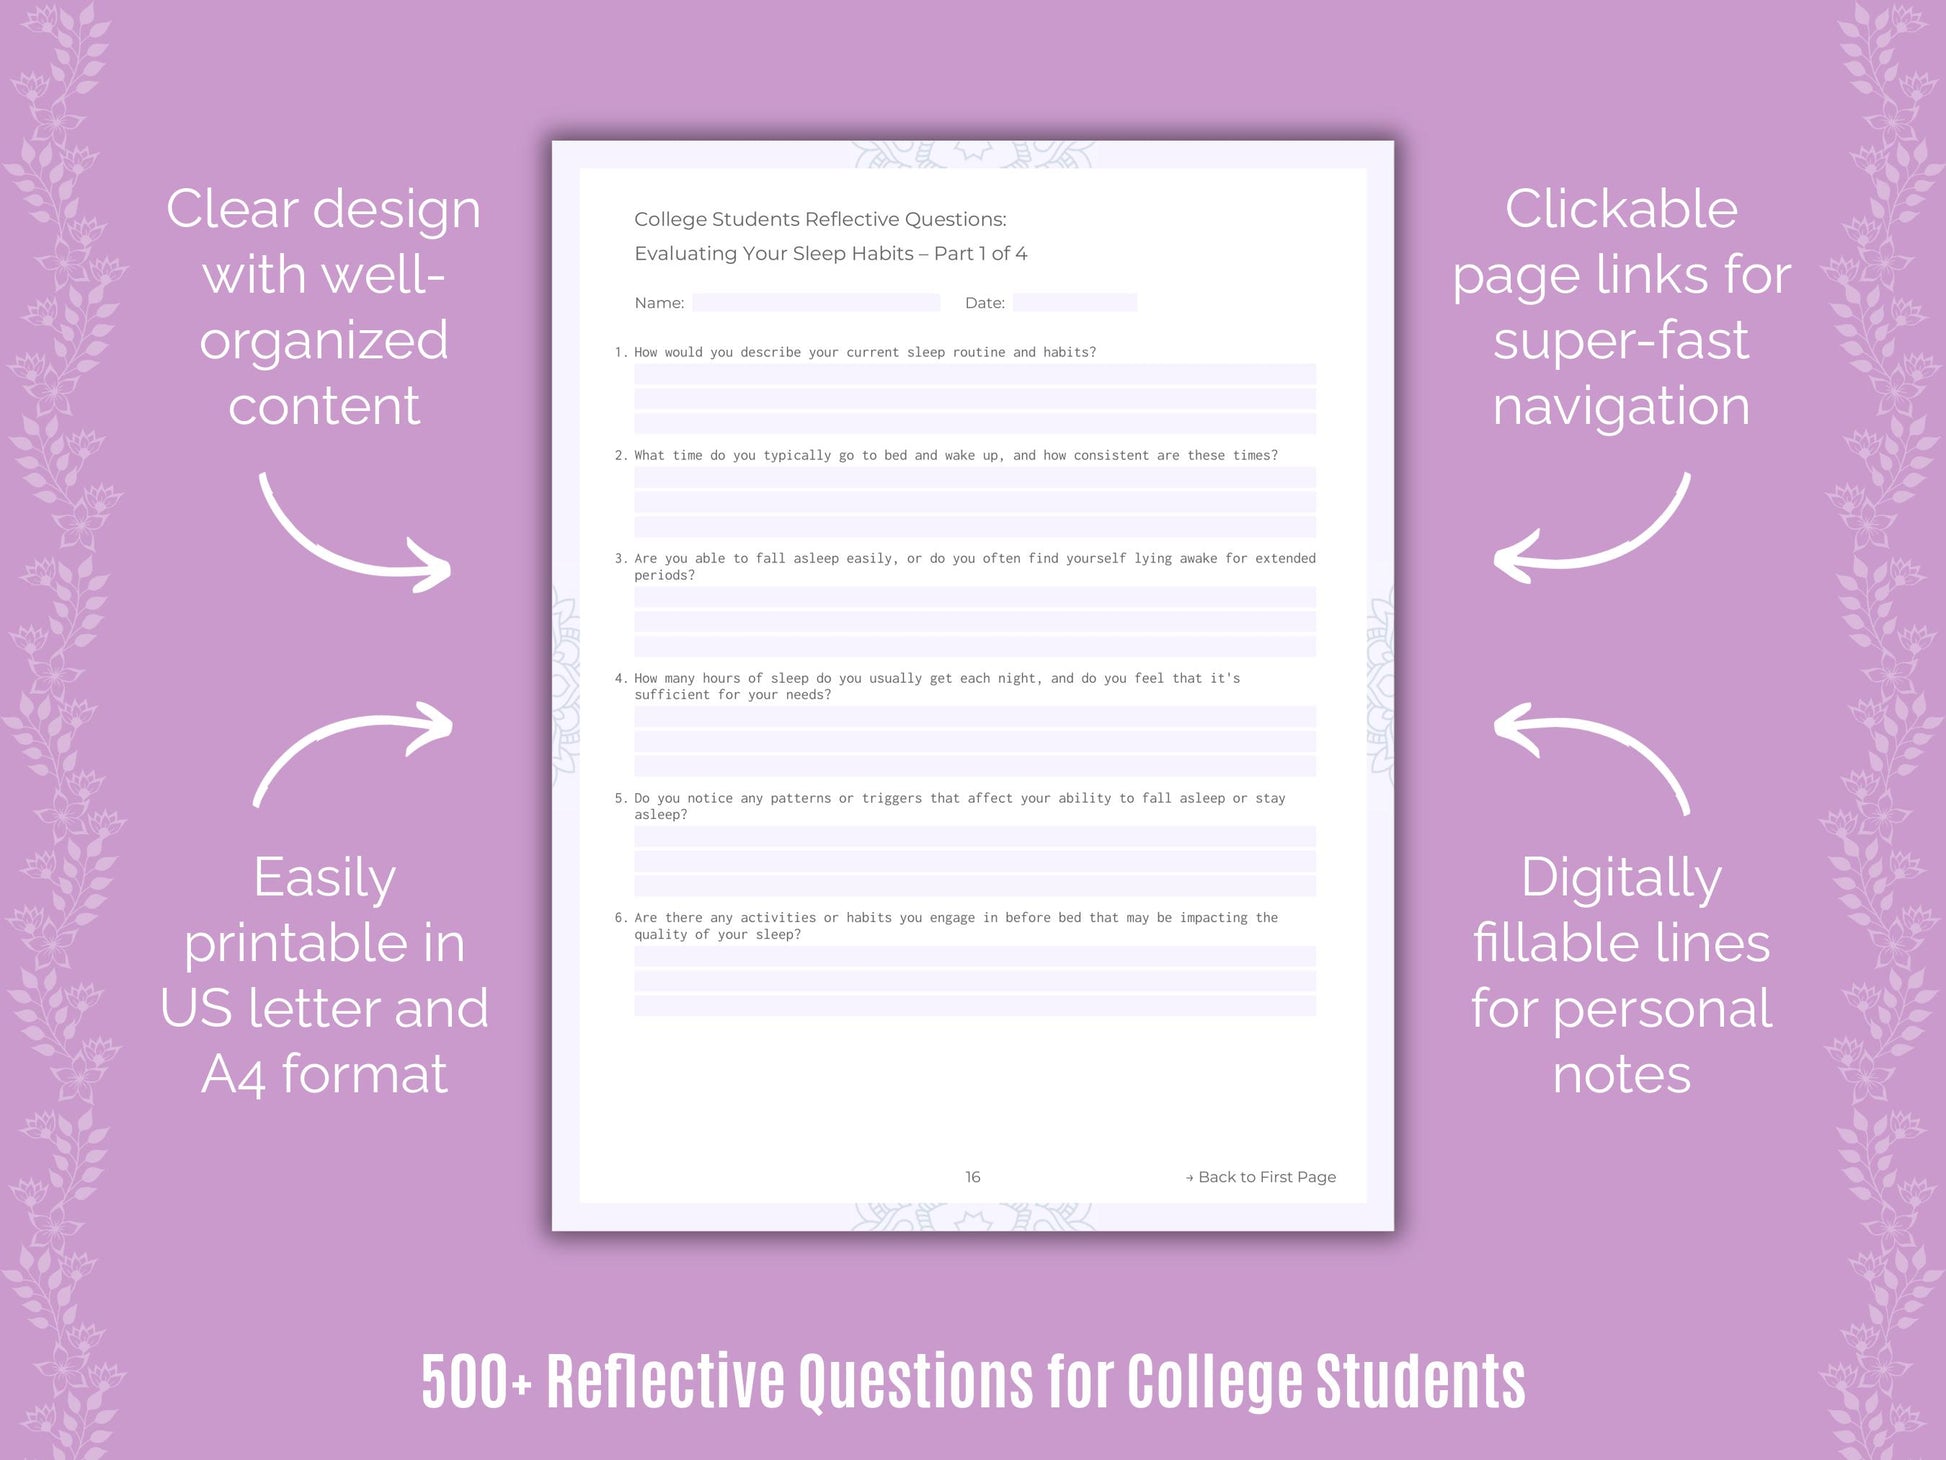 College Students Reflective Questions Resource